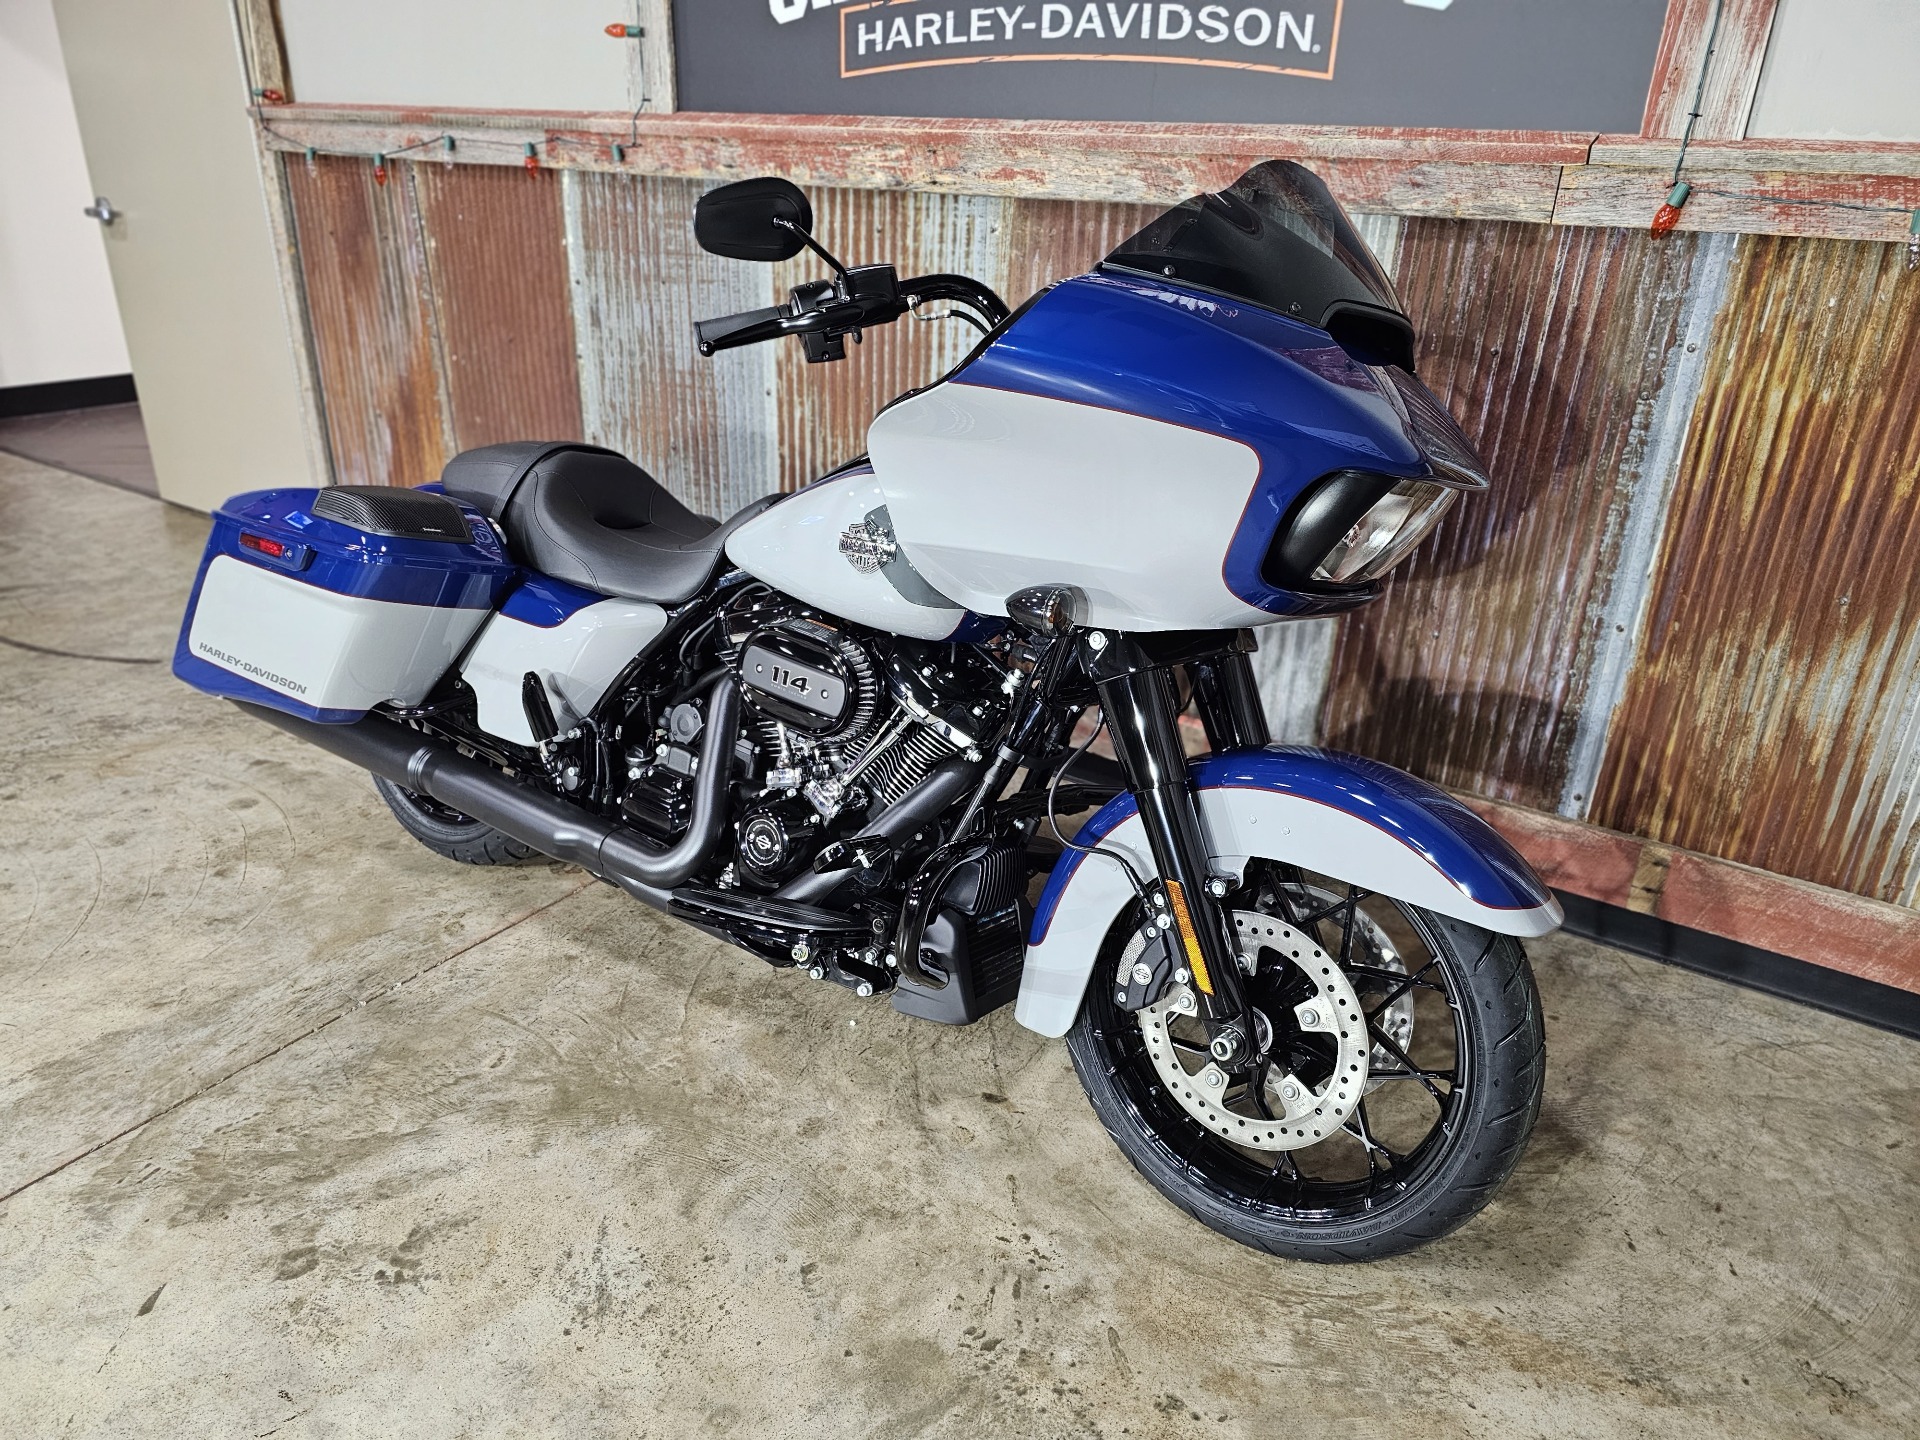 2023 Harley-Davidson Road Glide® Special in Chippewa Falls, Wisconsin - Photo 4